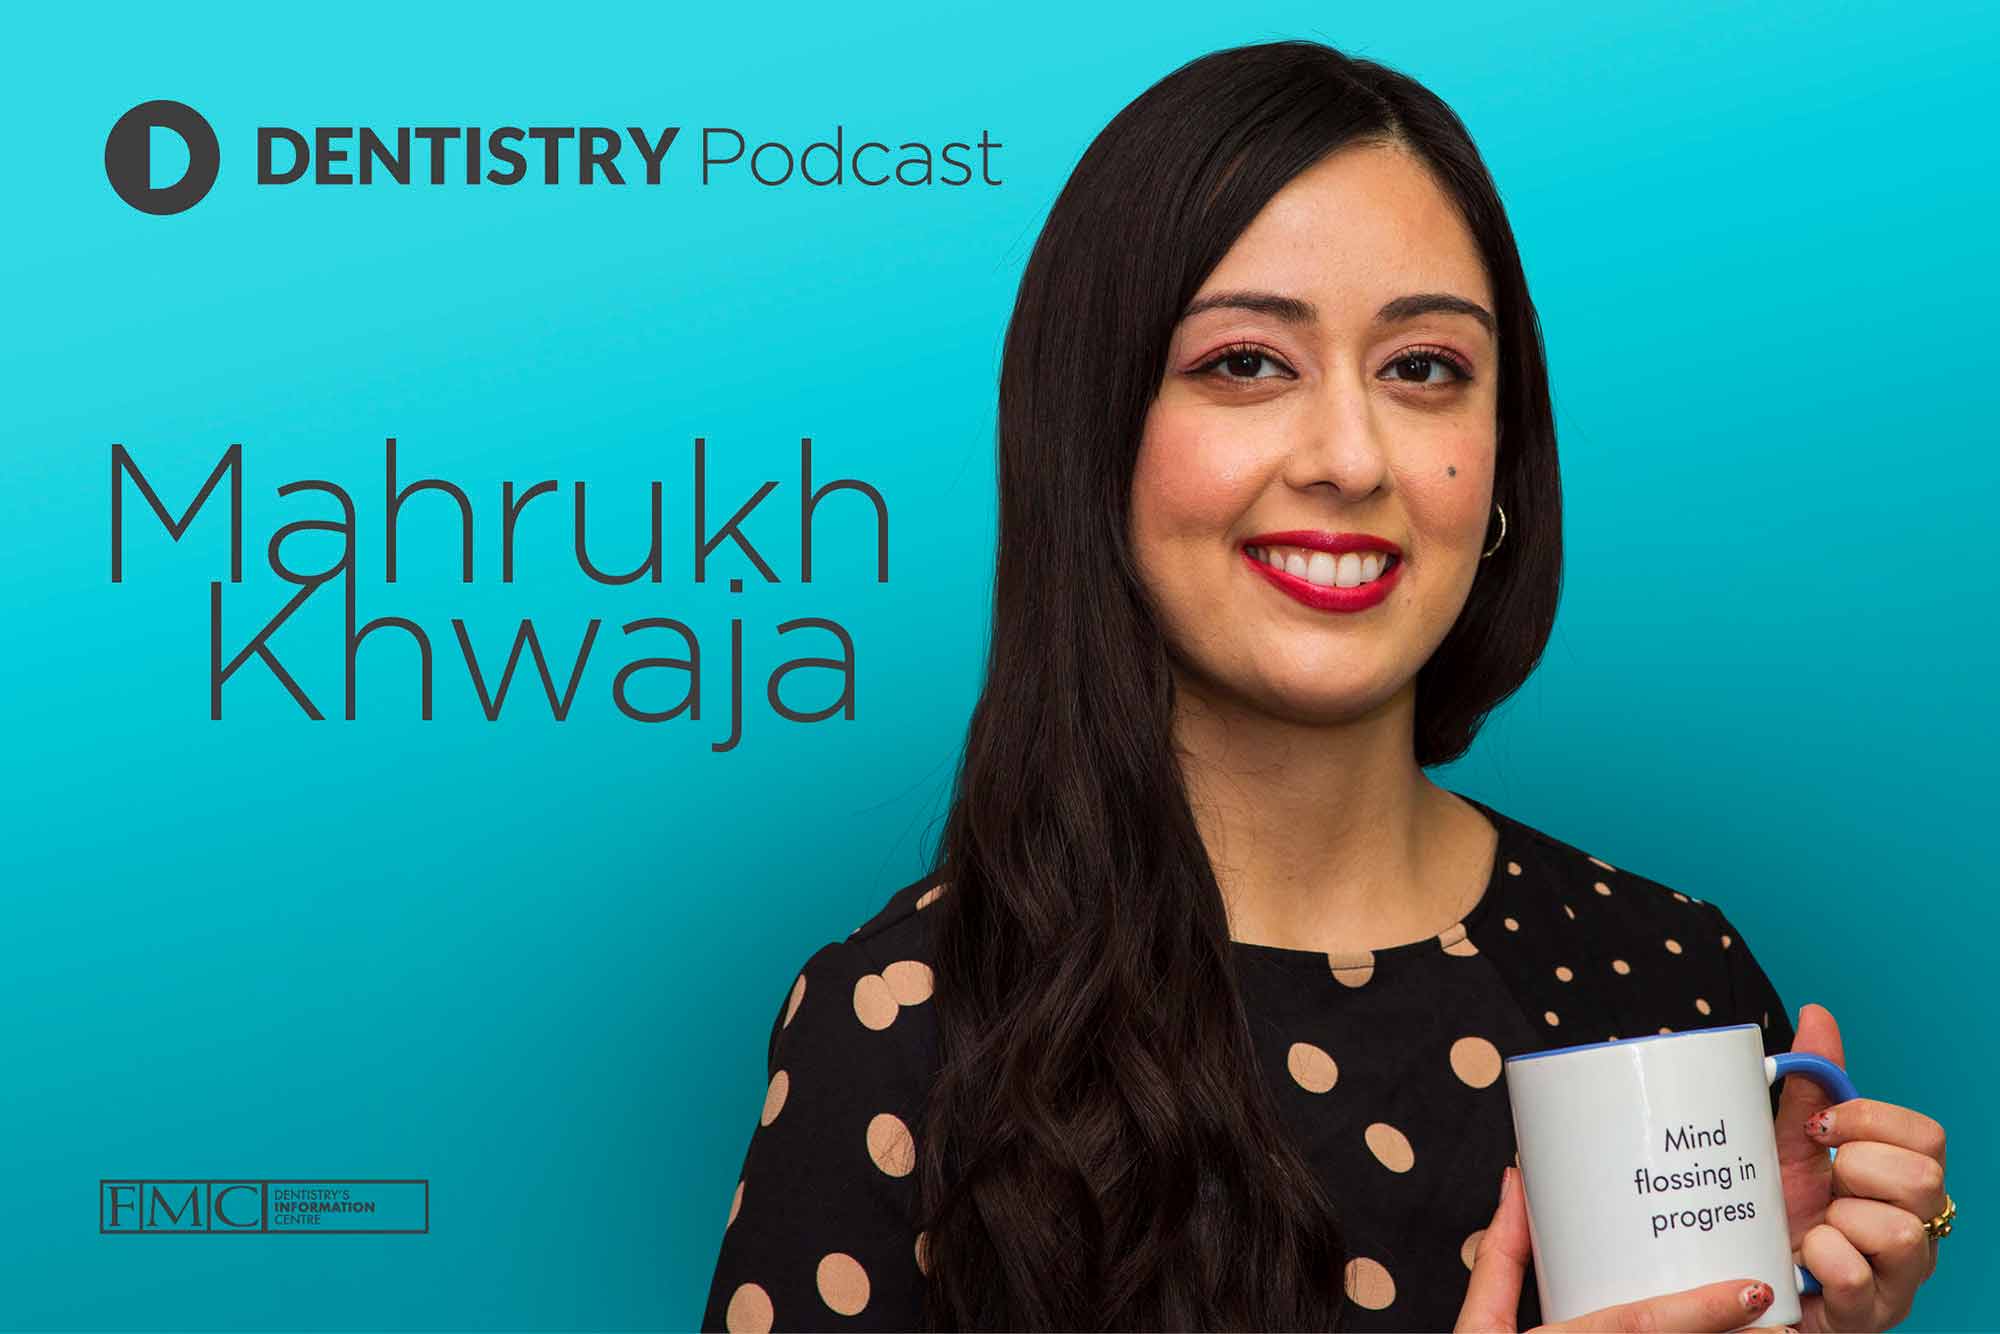 In this week's episode we chat to Mahrukh Khwaja about mental health, resilience and mindfulness in dentistry